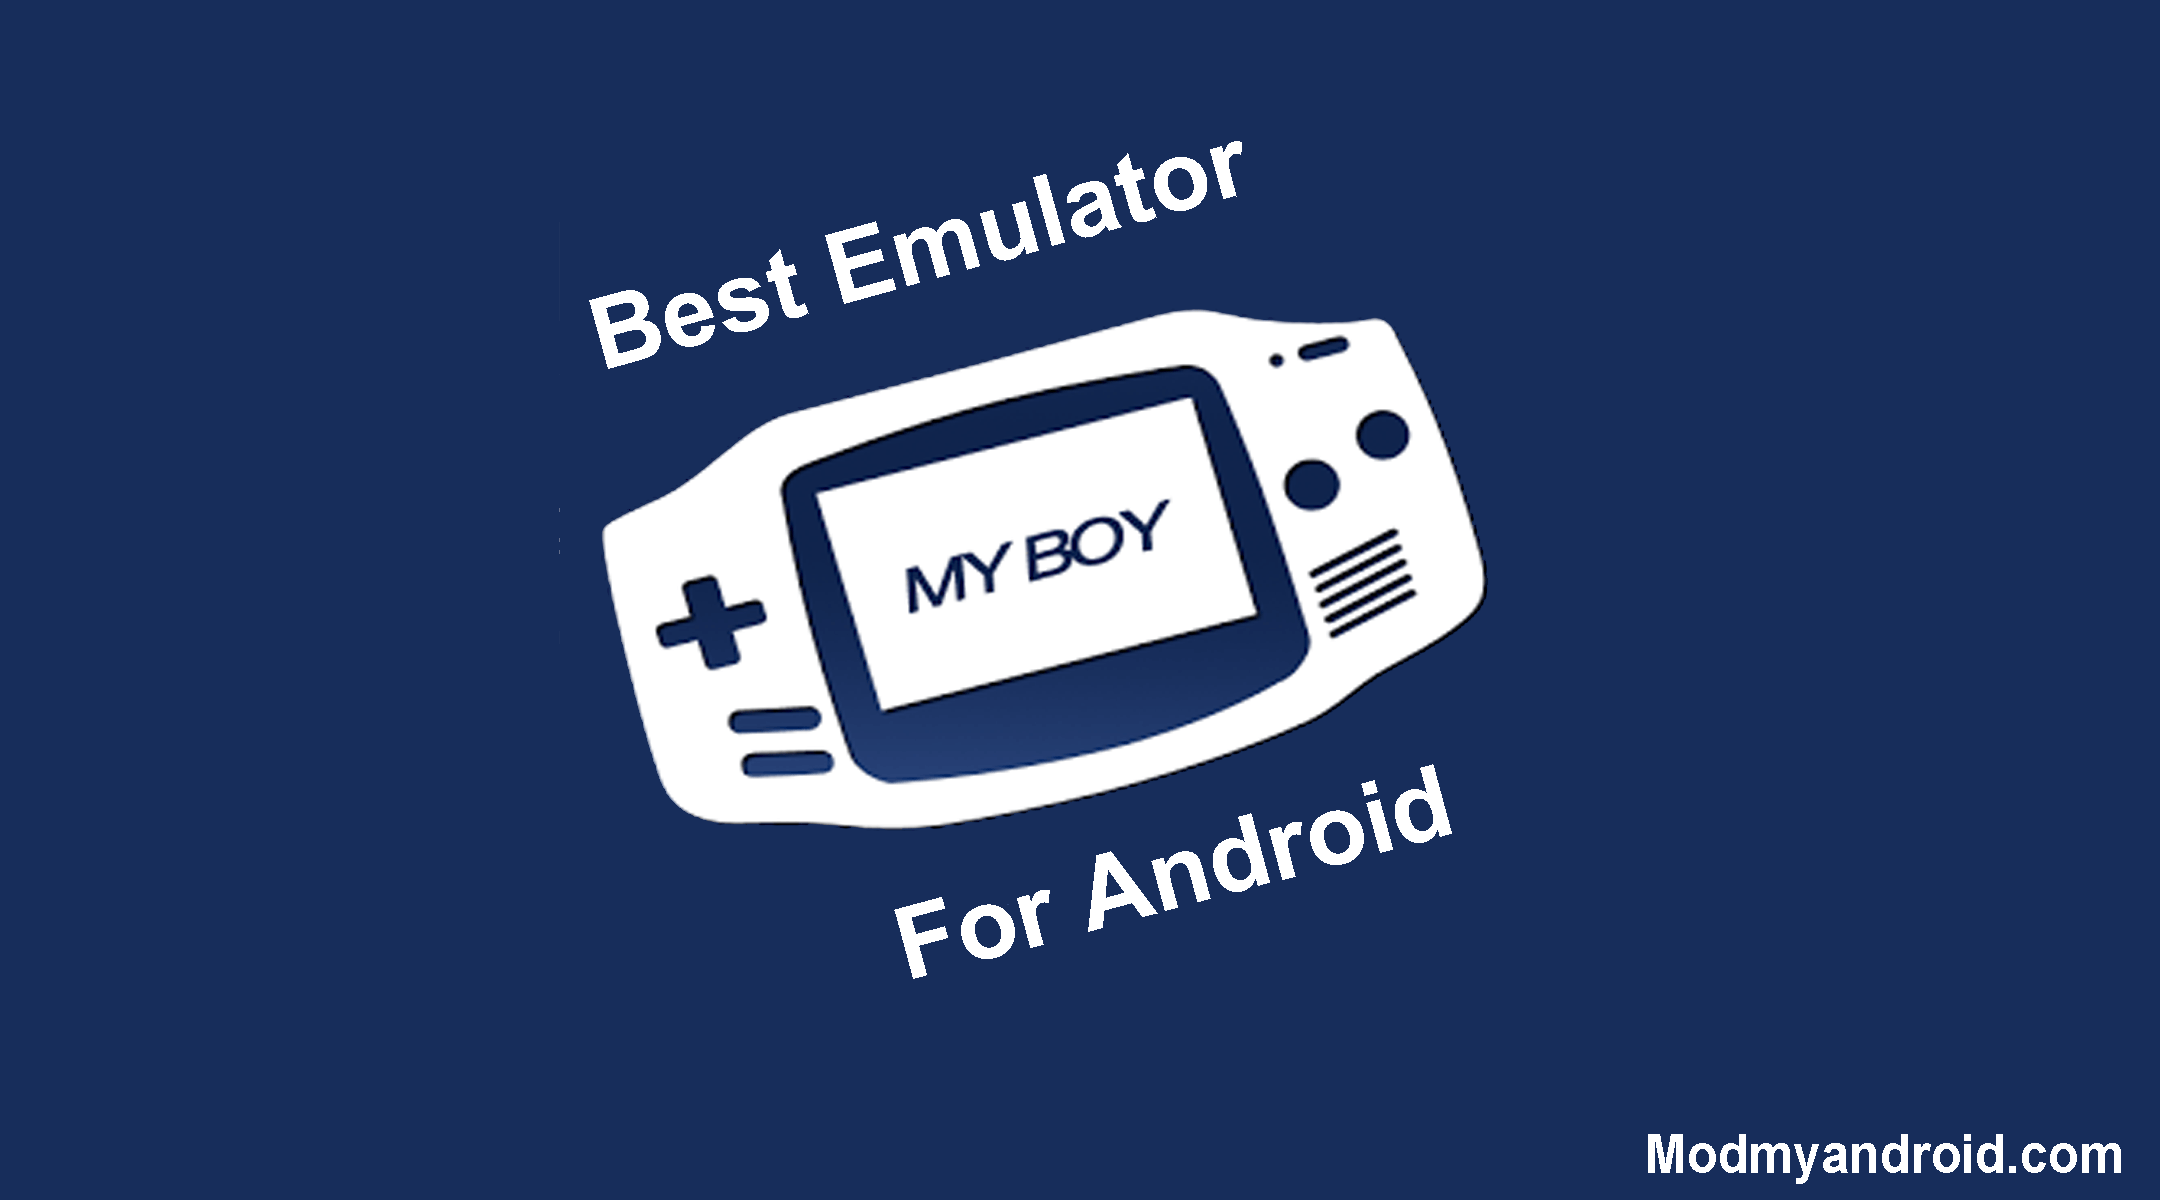 download an emulator for gba on mac